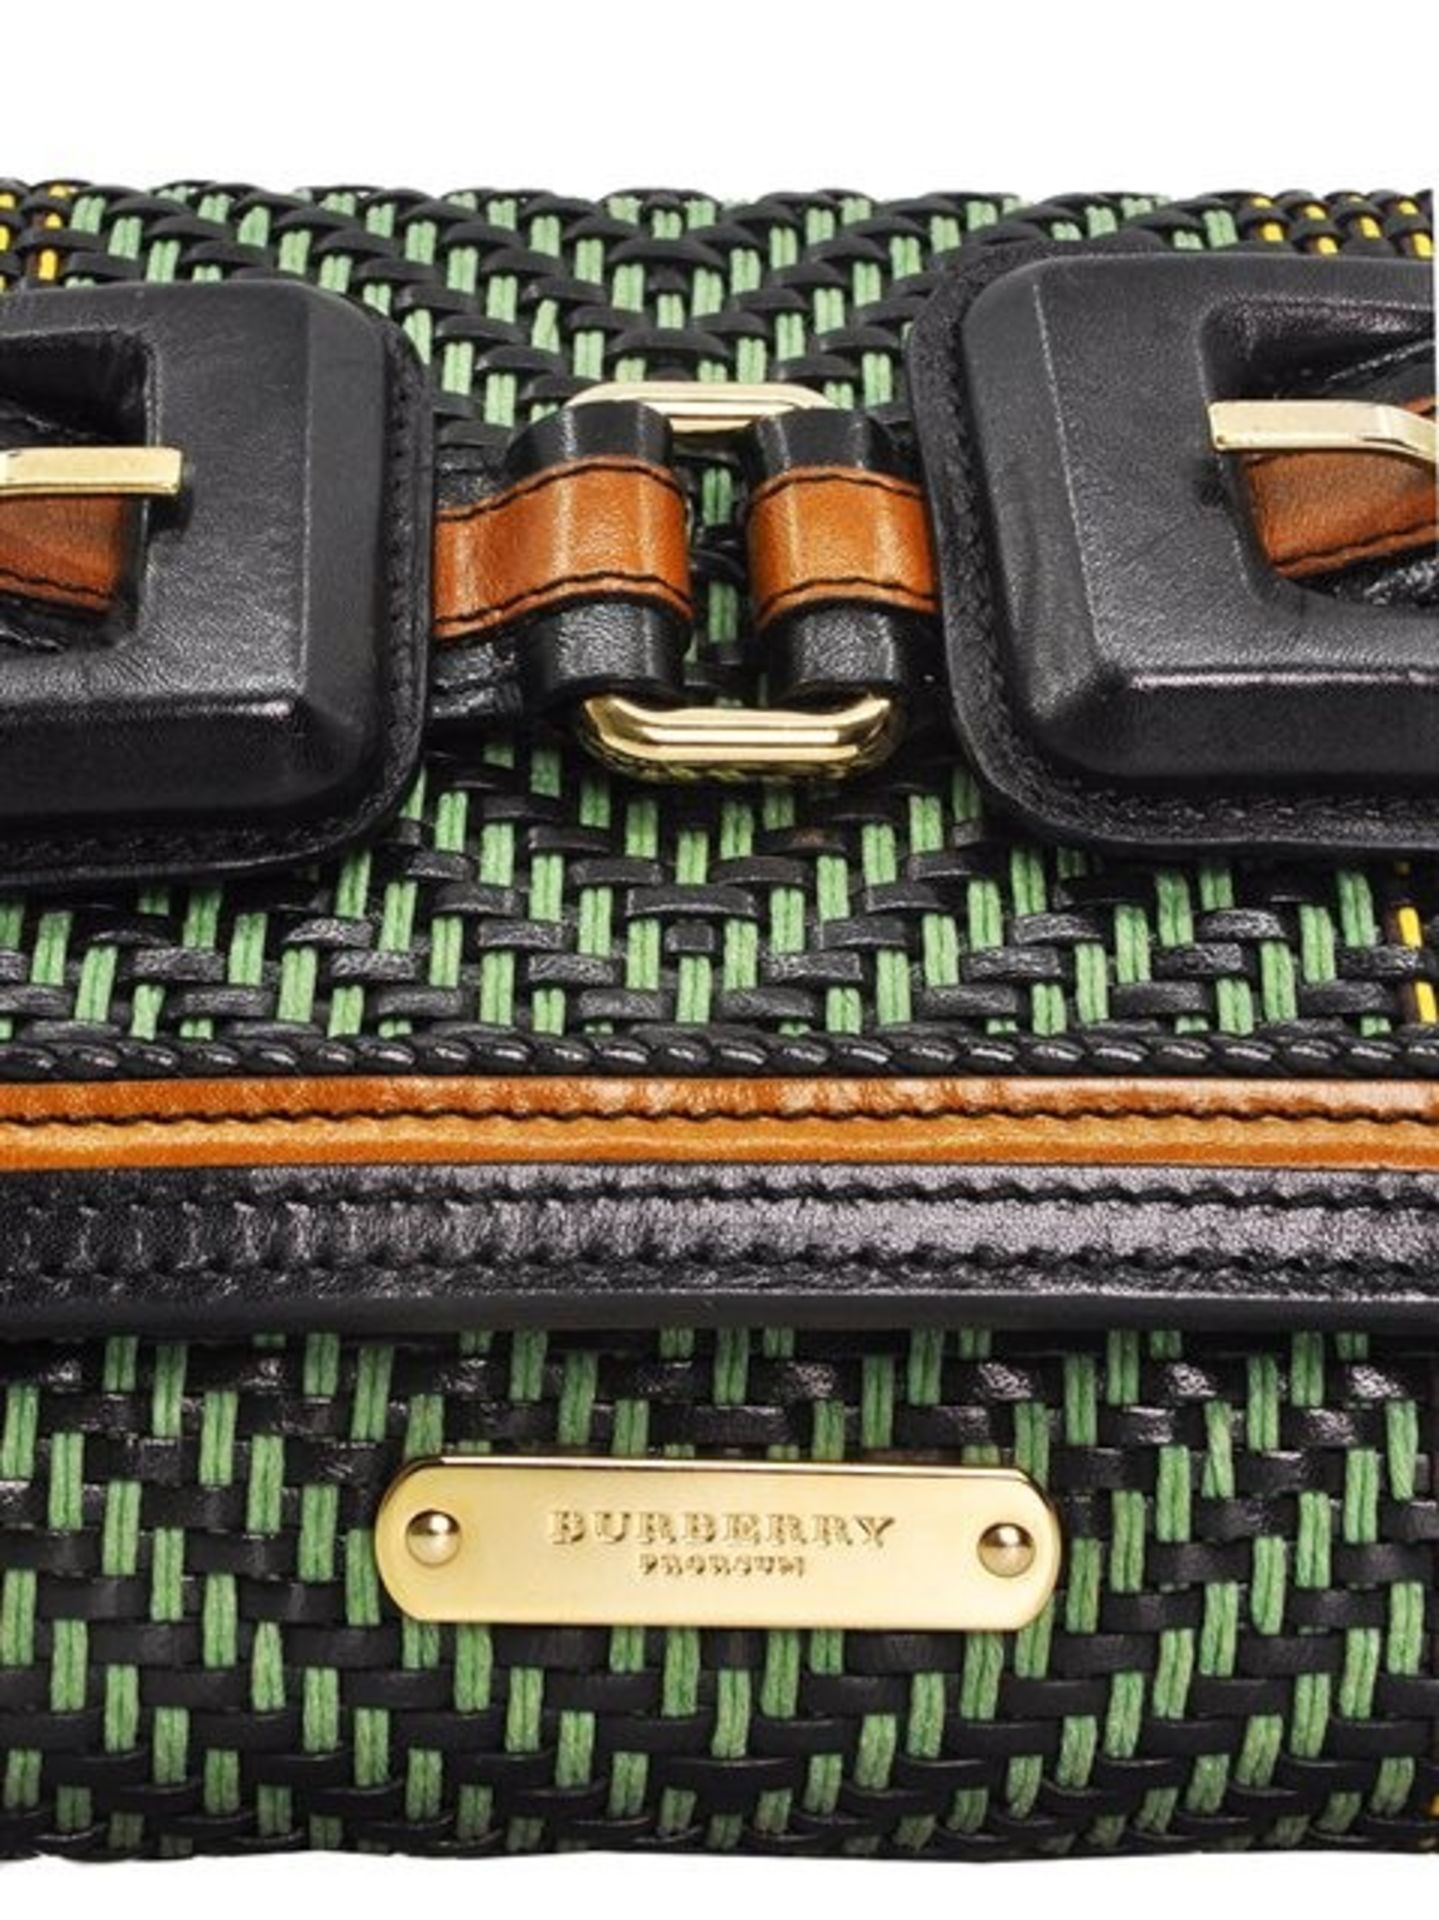 Burberry Wicker Knitting Leather Clutch - Image 3 of 8